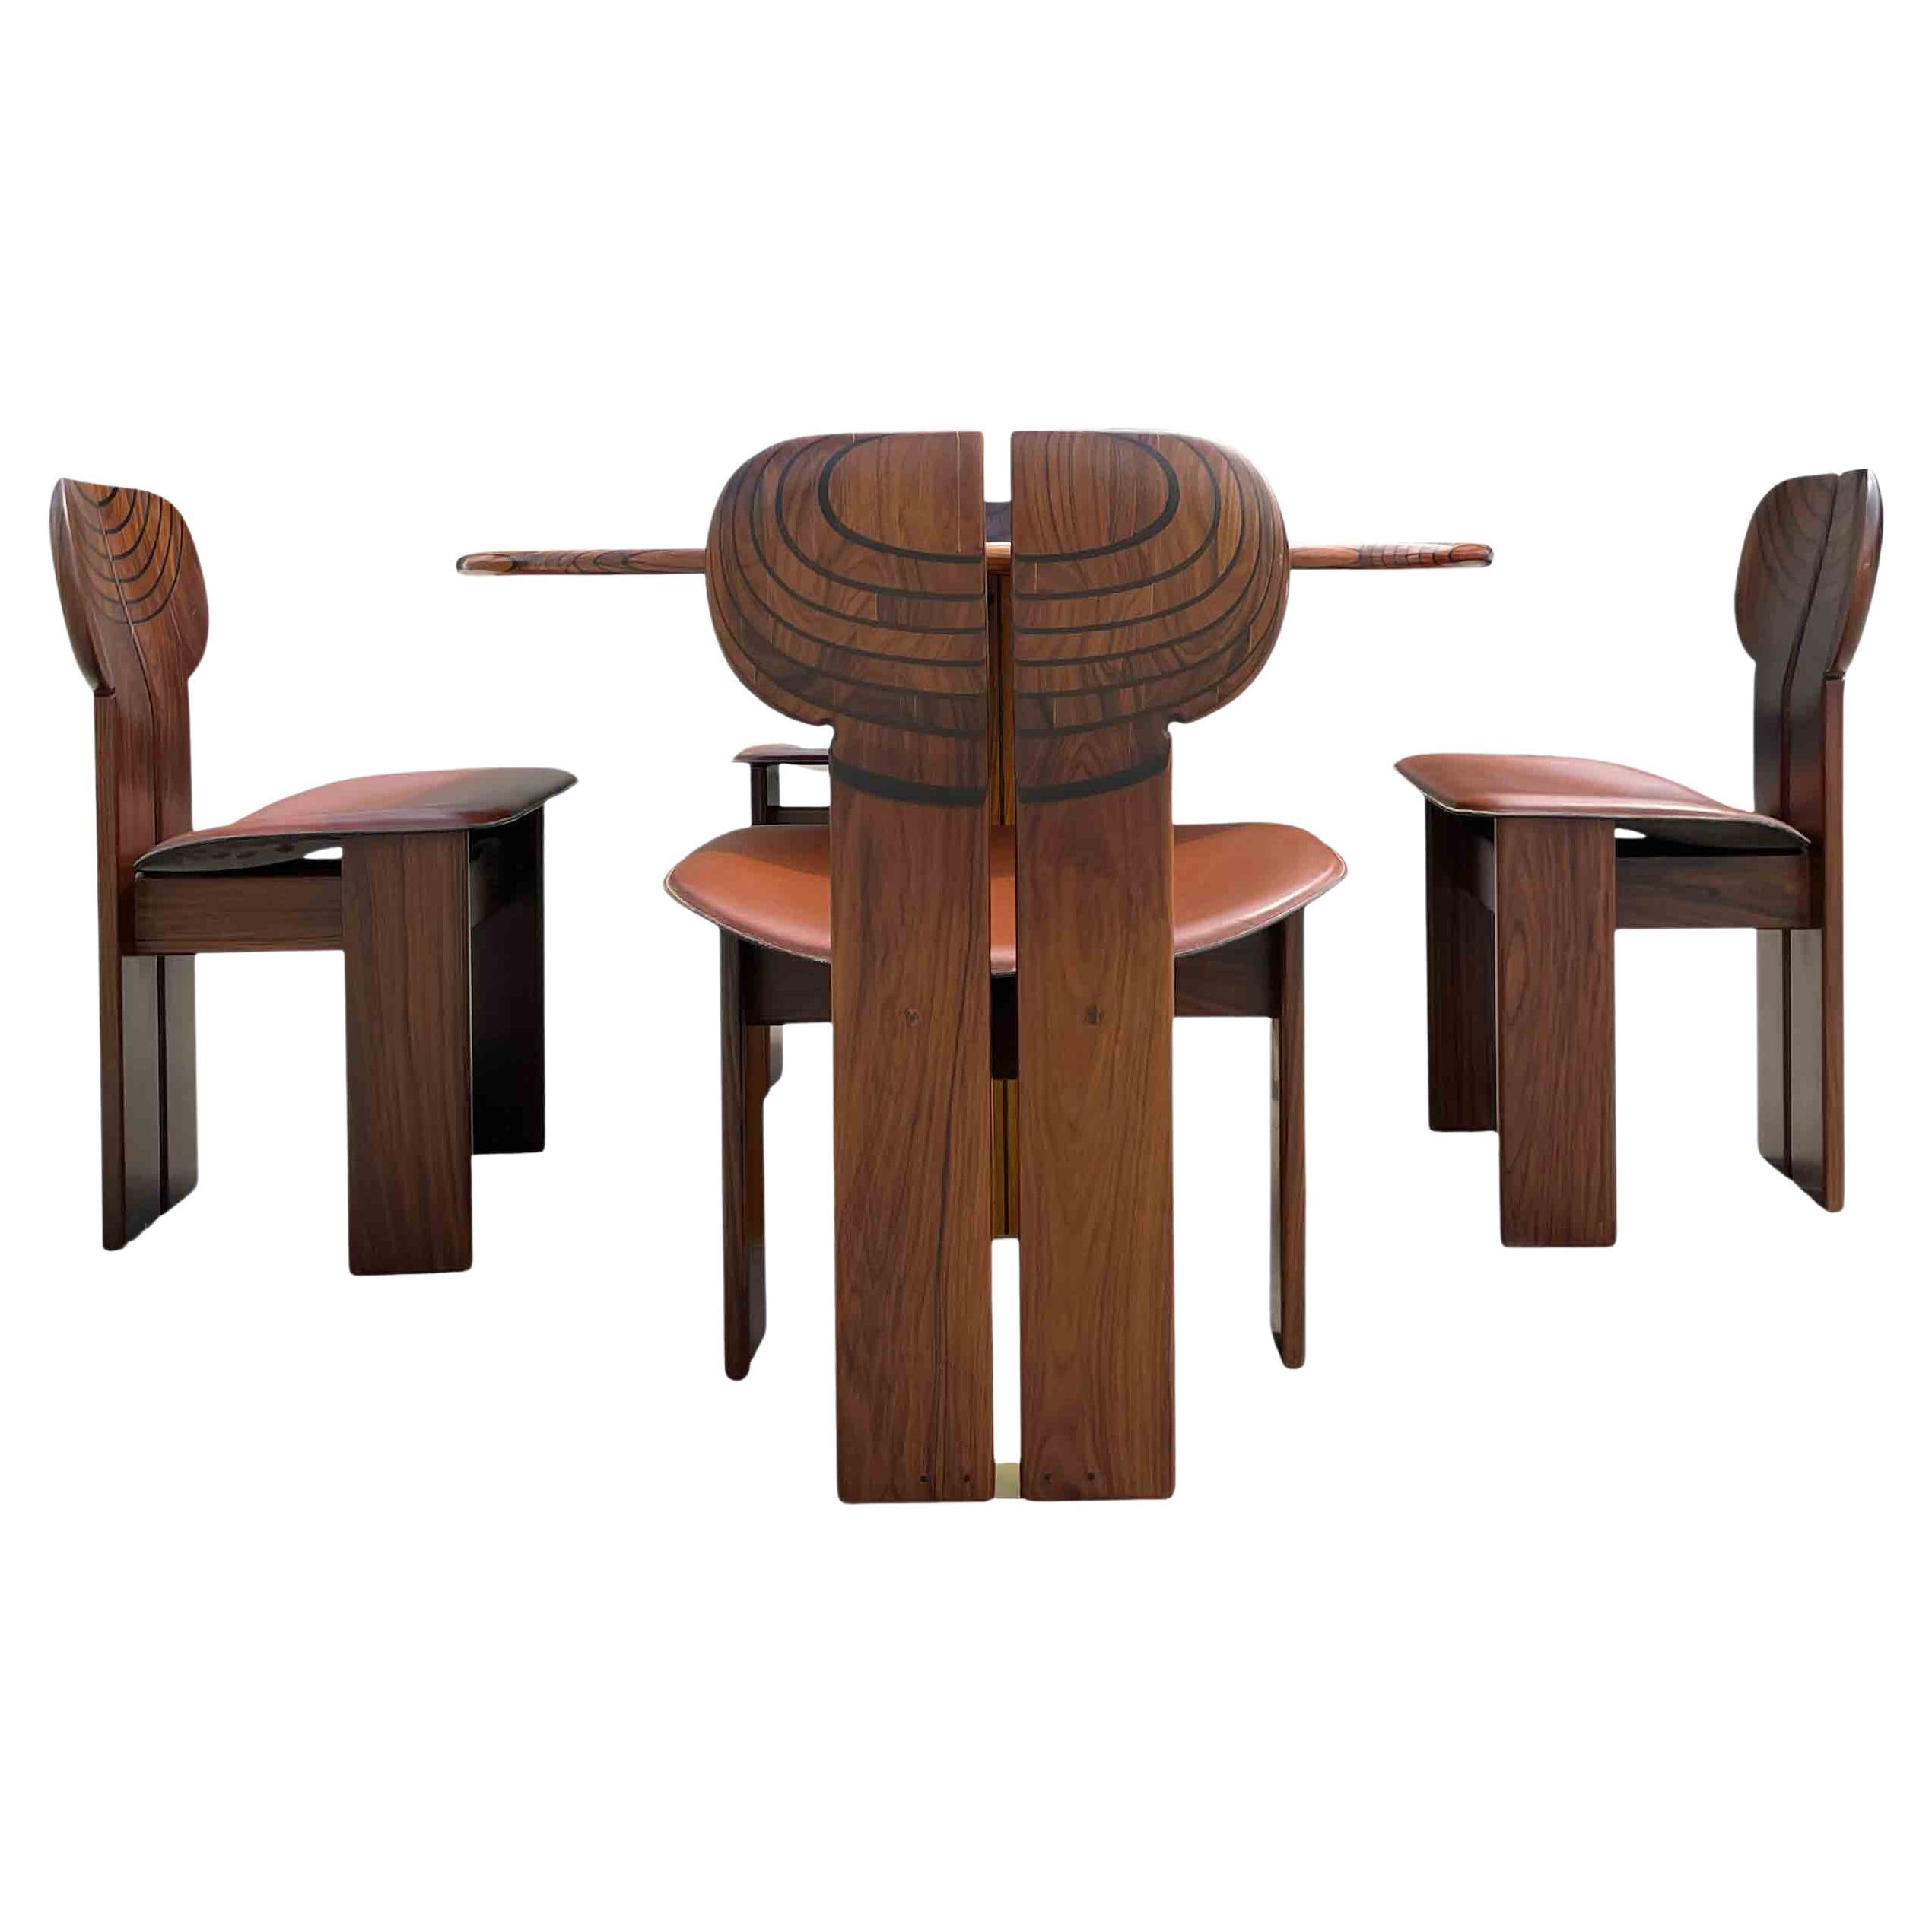 Afra & Tobia Scarpa Africa Dining Room Set for Maxalto, 4 Chairs and Table, 1976 For Sale